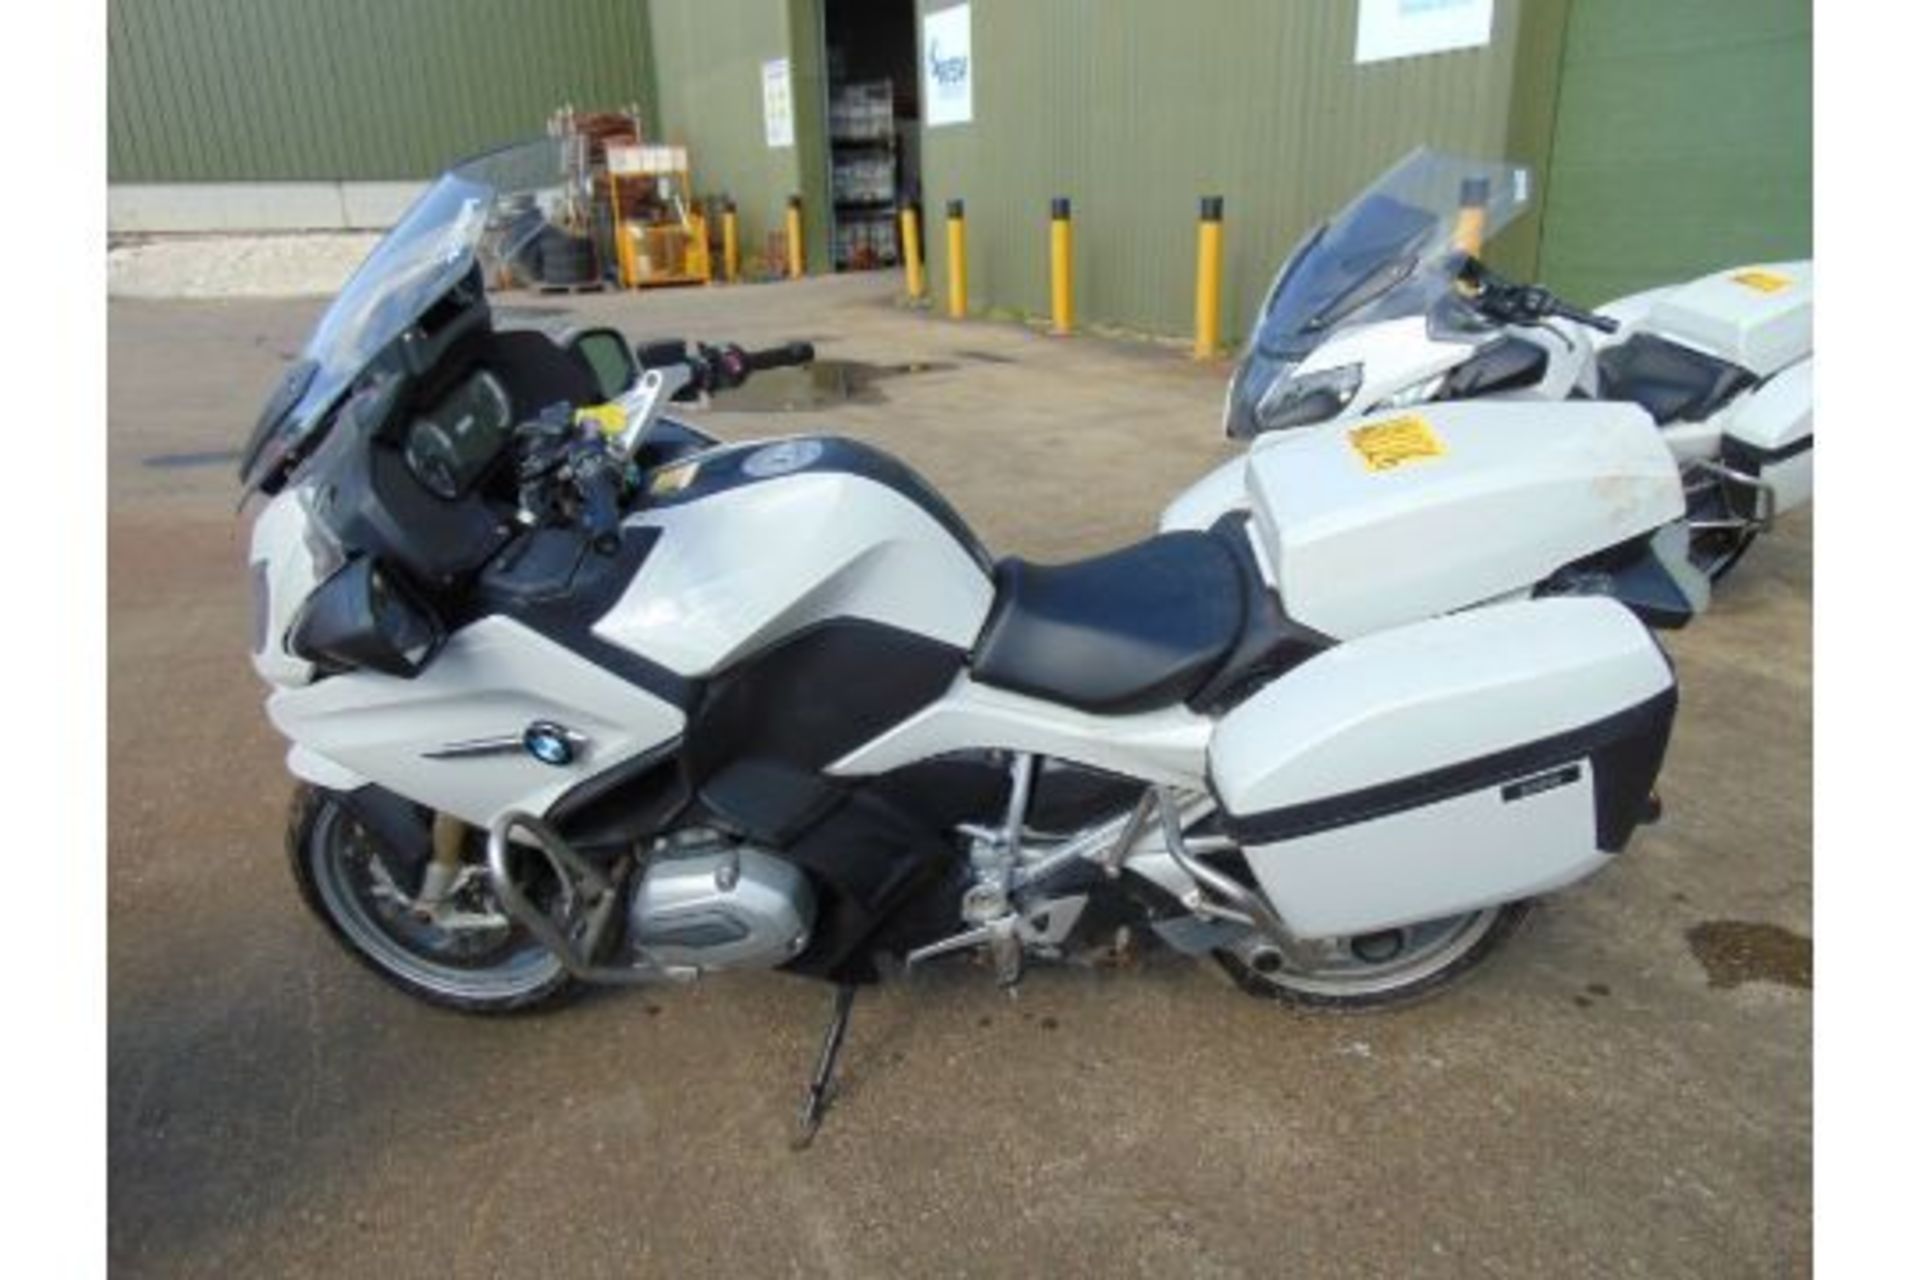 2015 BMW R1200RT Motorbike - Recent release from UK Police - Image 4 of 19